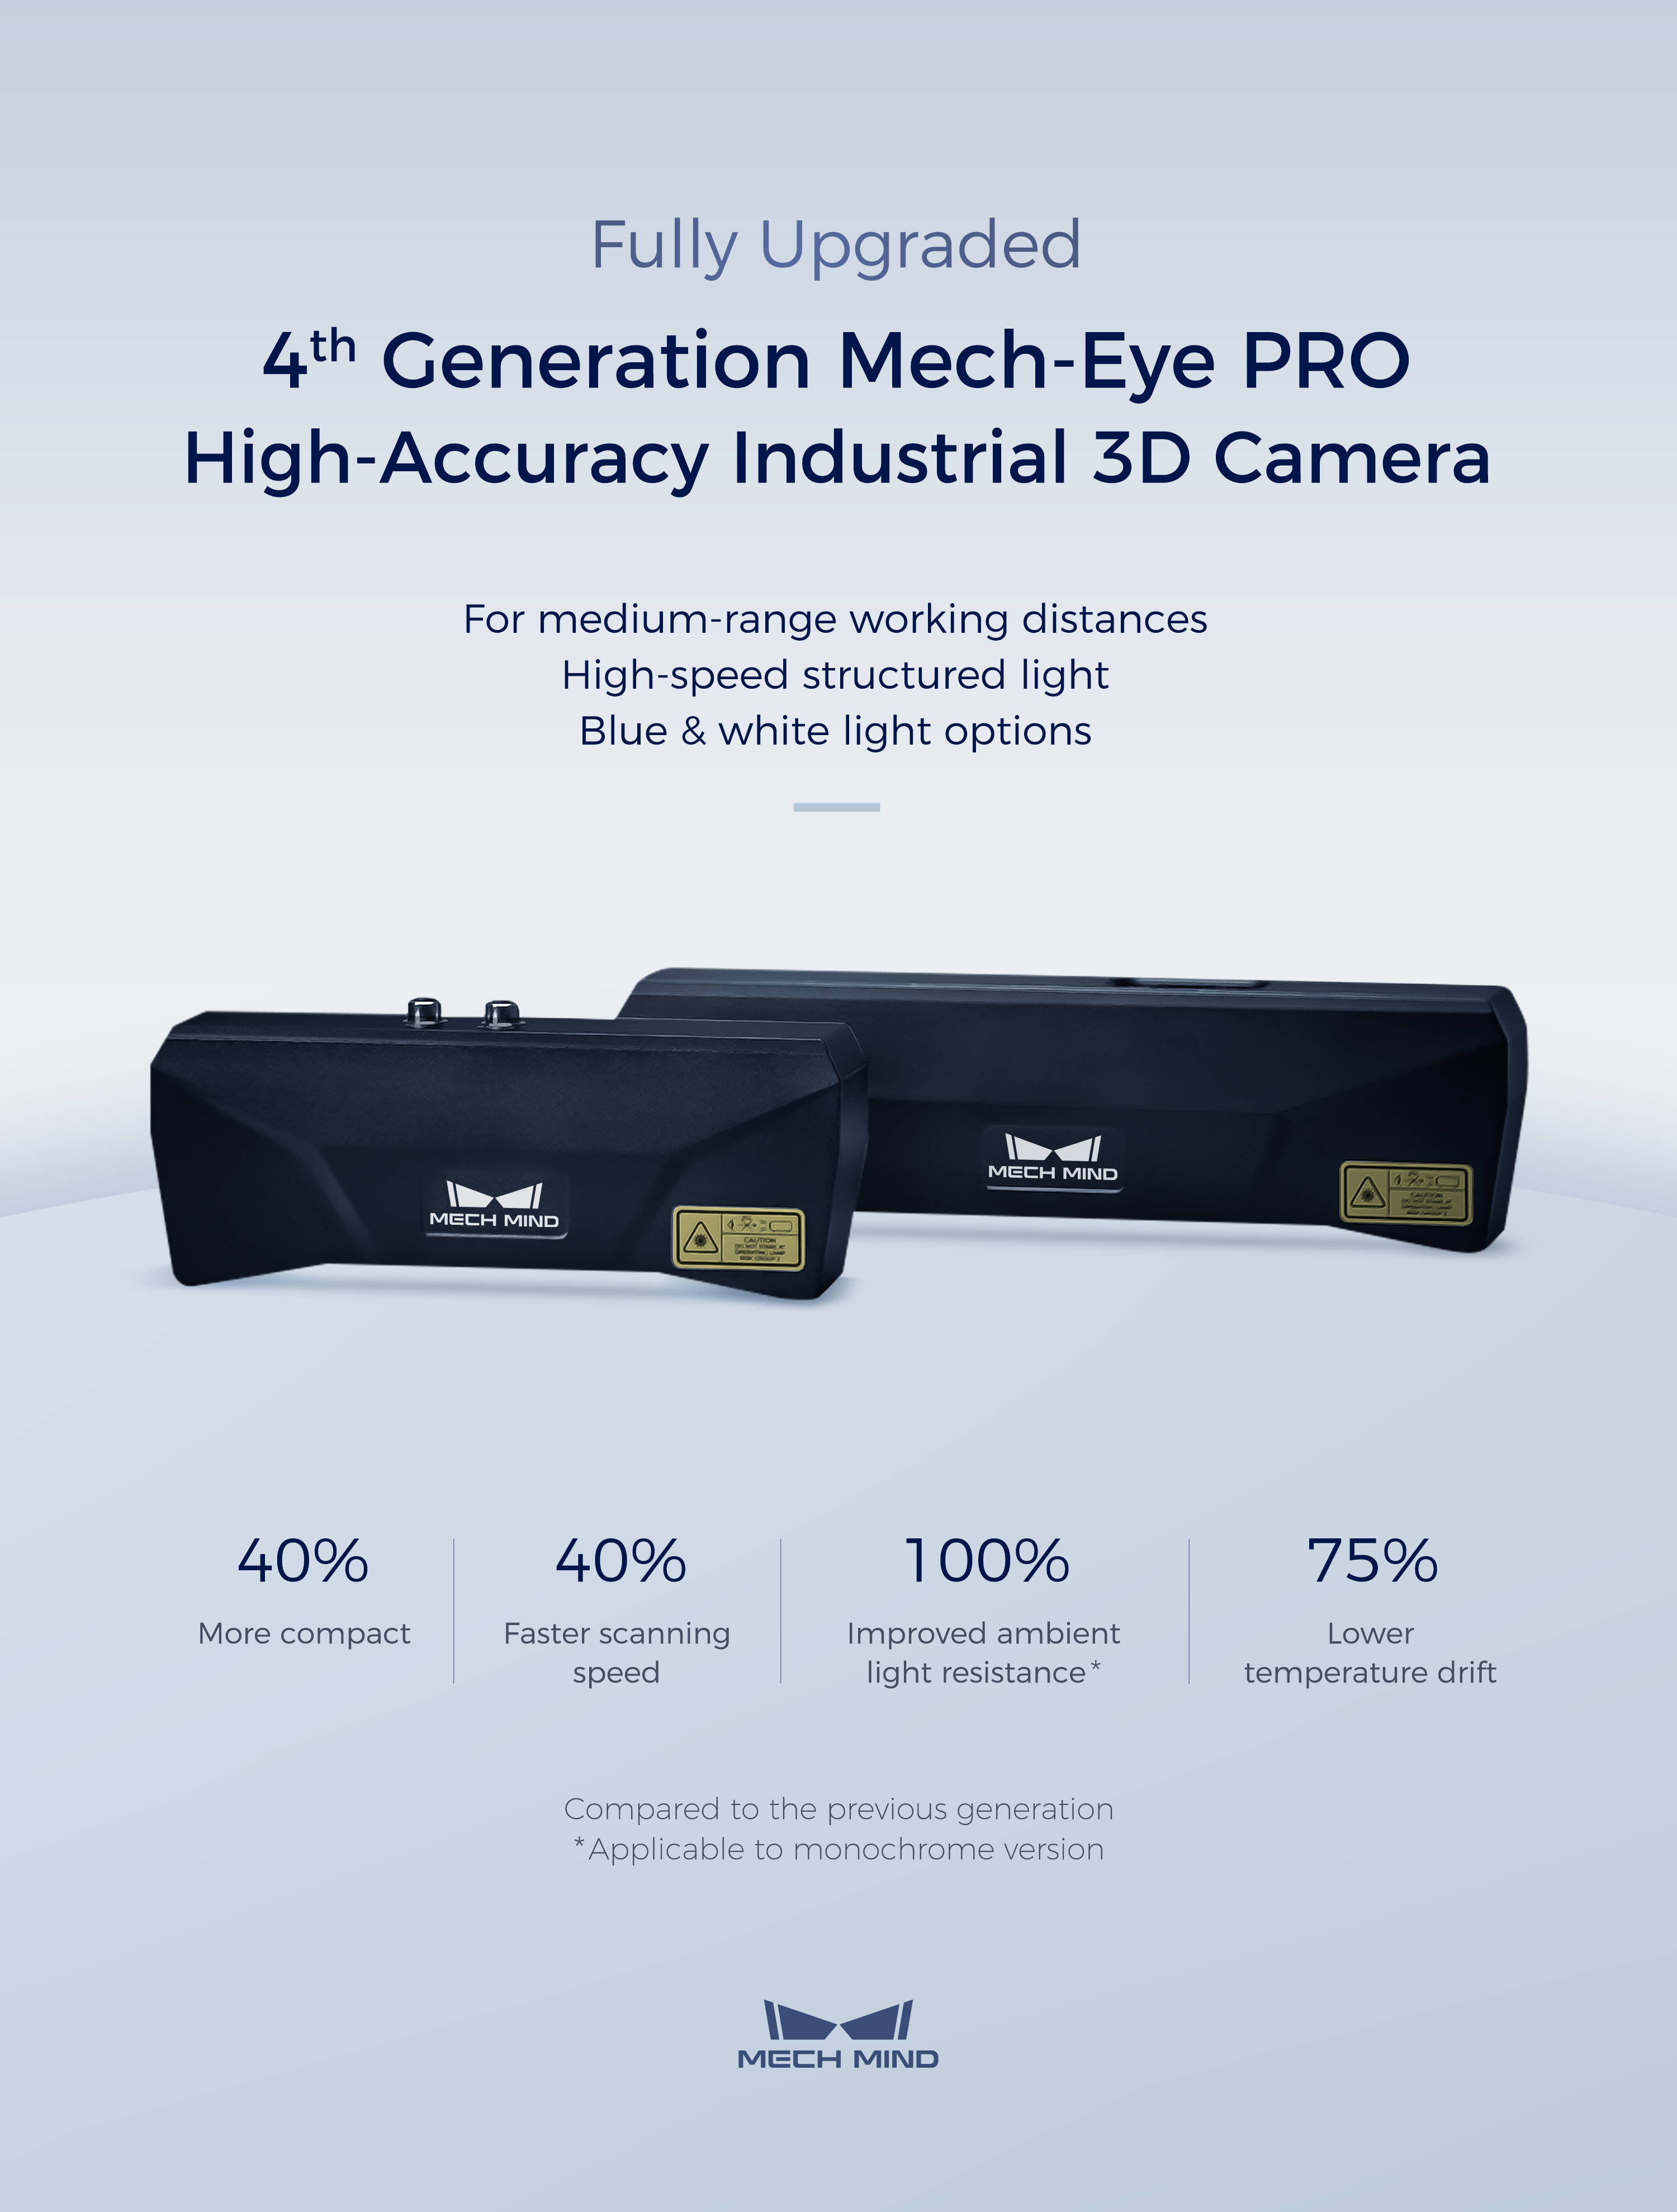 Mech-Mind Introduces 4th Generation Mech-Eye PRO Industrial 3D Camera for Medium-Range Working Distances Featuring High Accuracy and Fast Scanning 